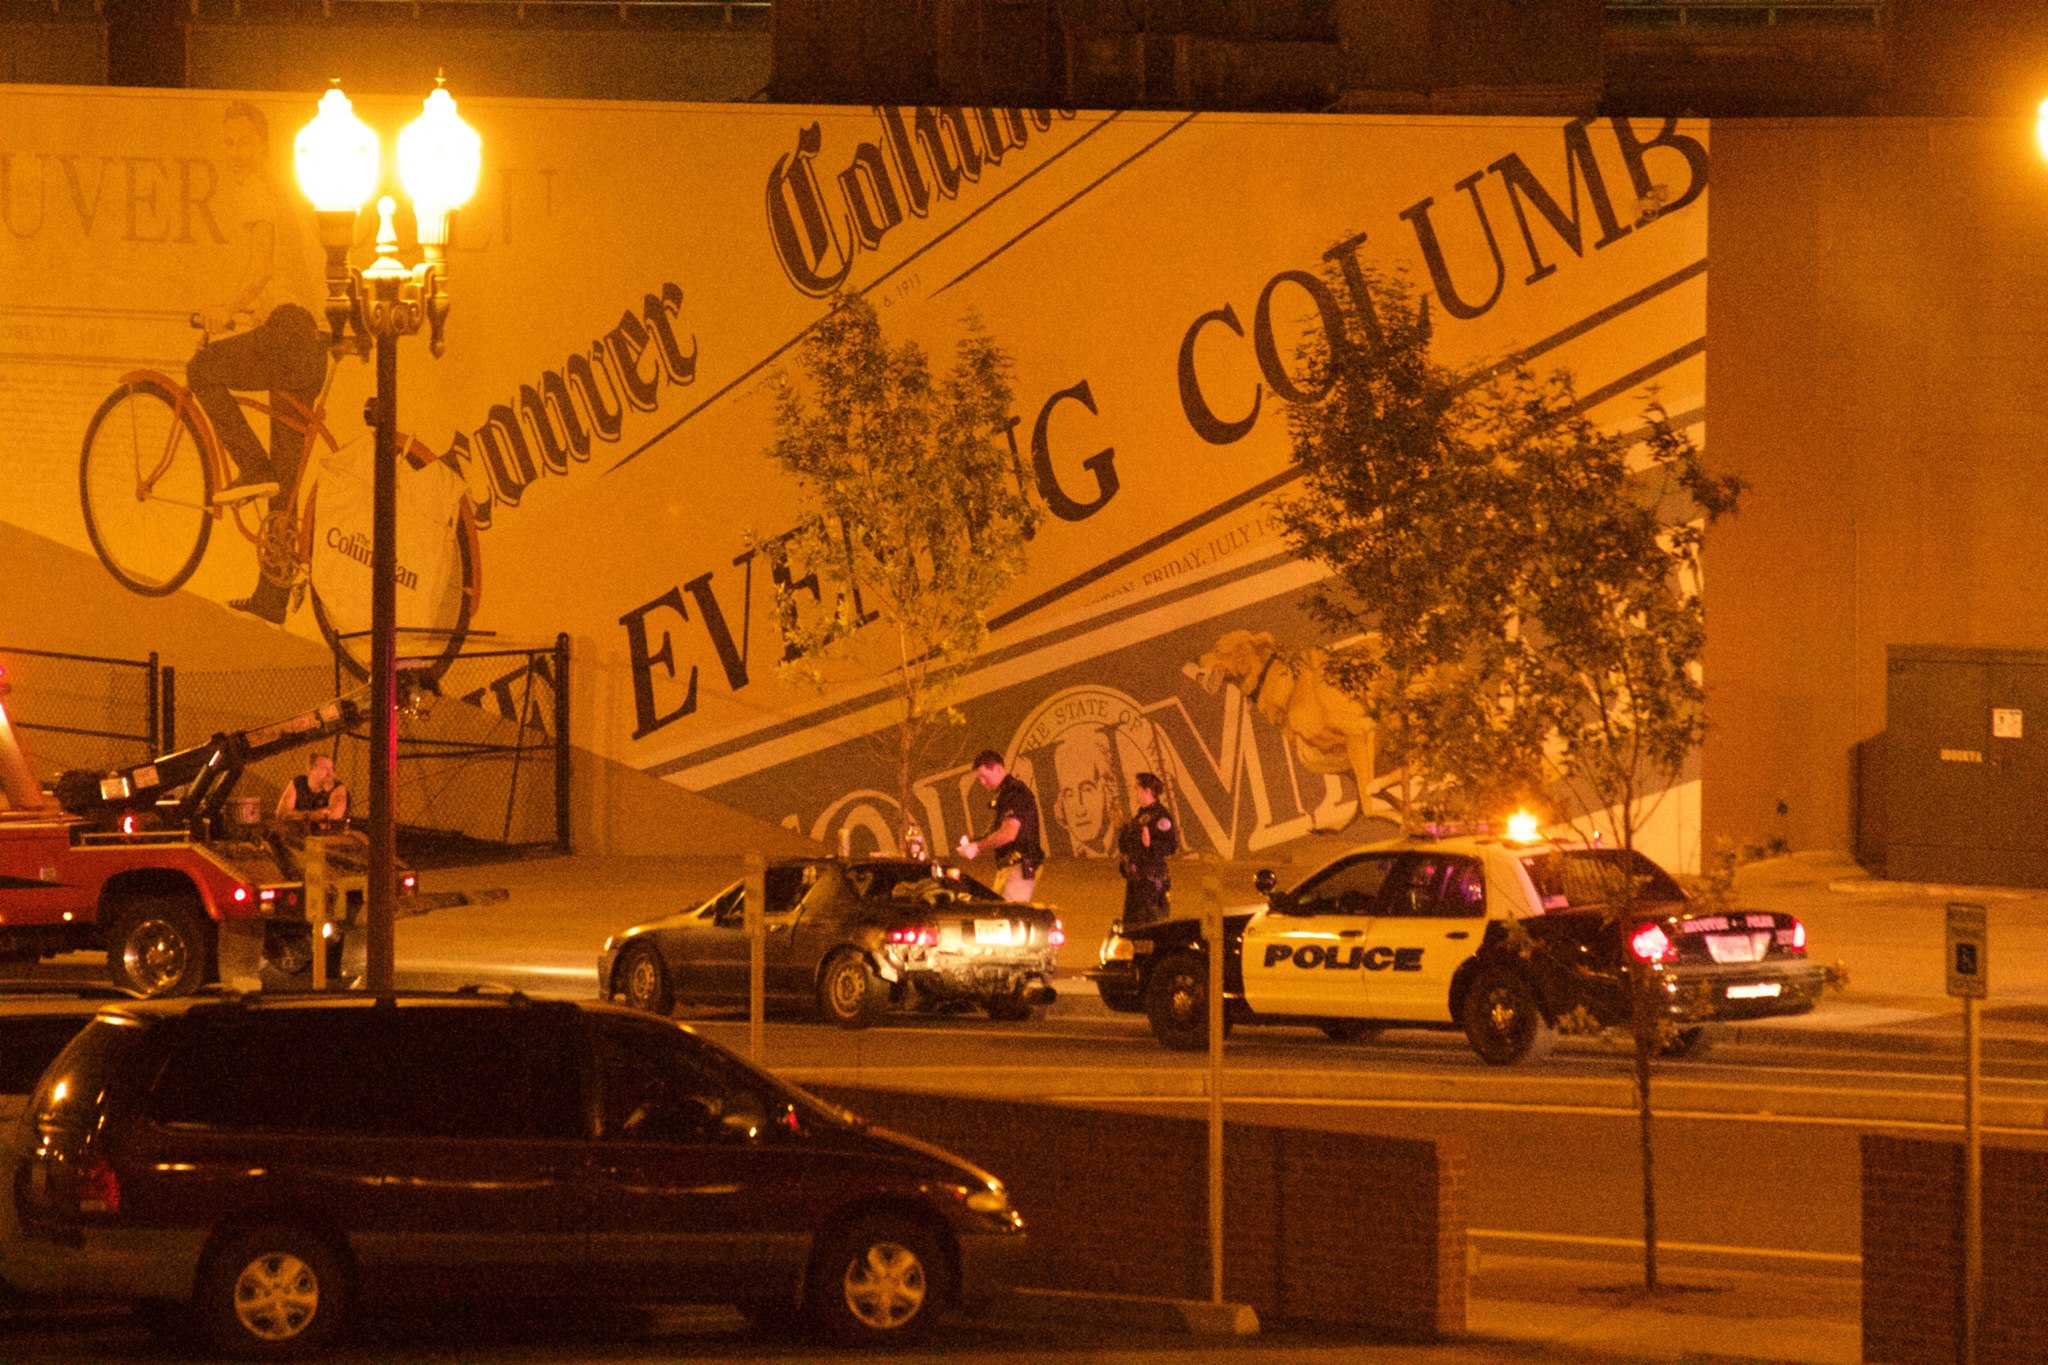 Police investigate an abandoned vehicle on Eighth and Grant streets in downtown Vancouver on Thursday night.